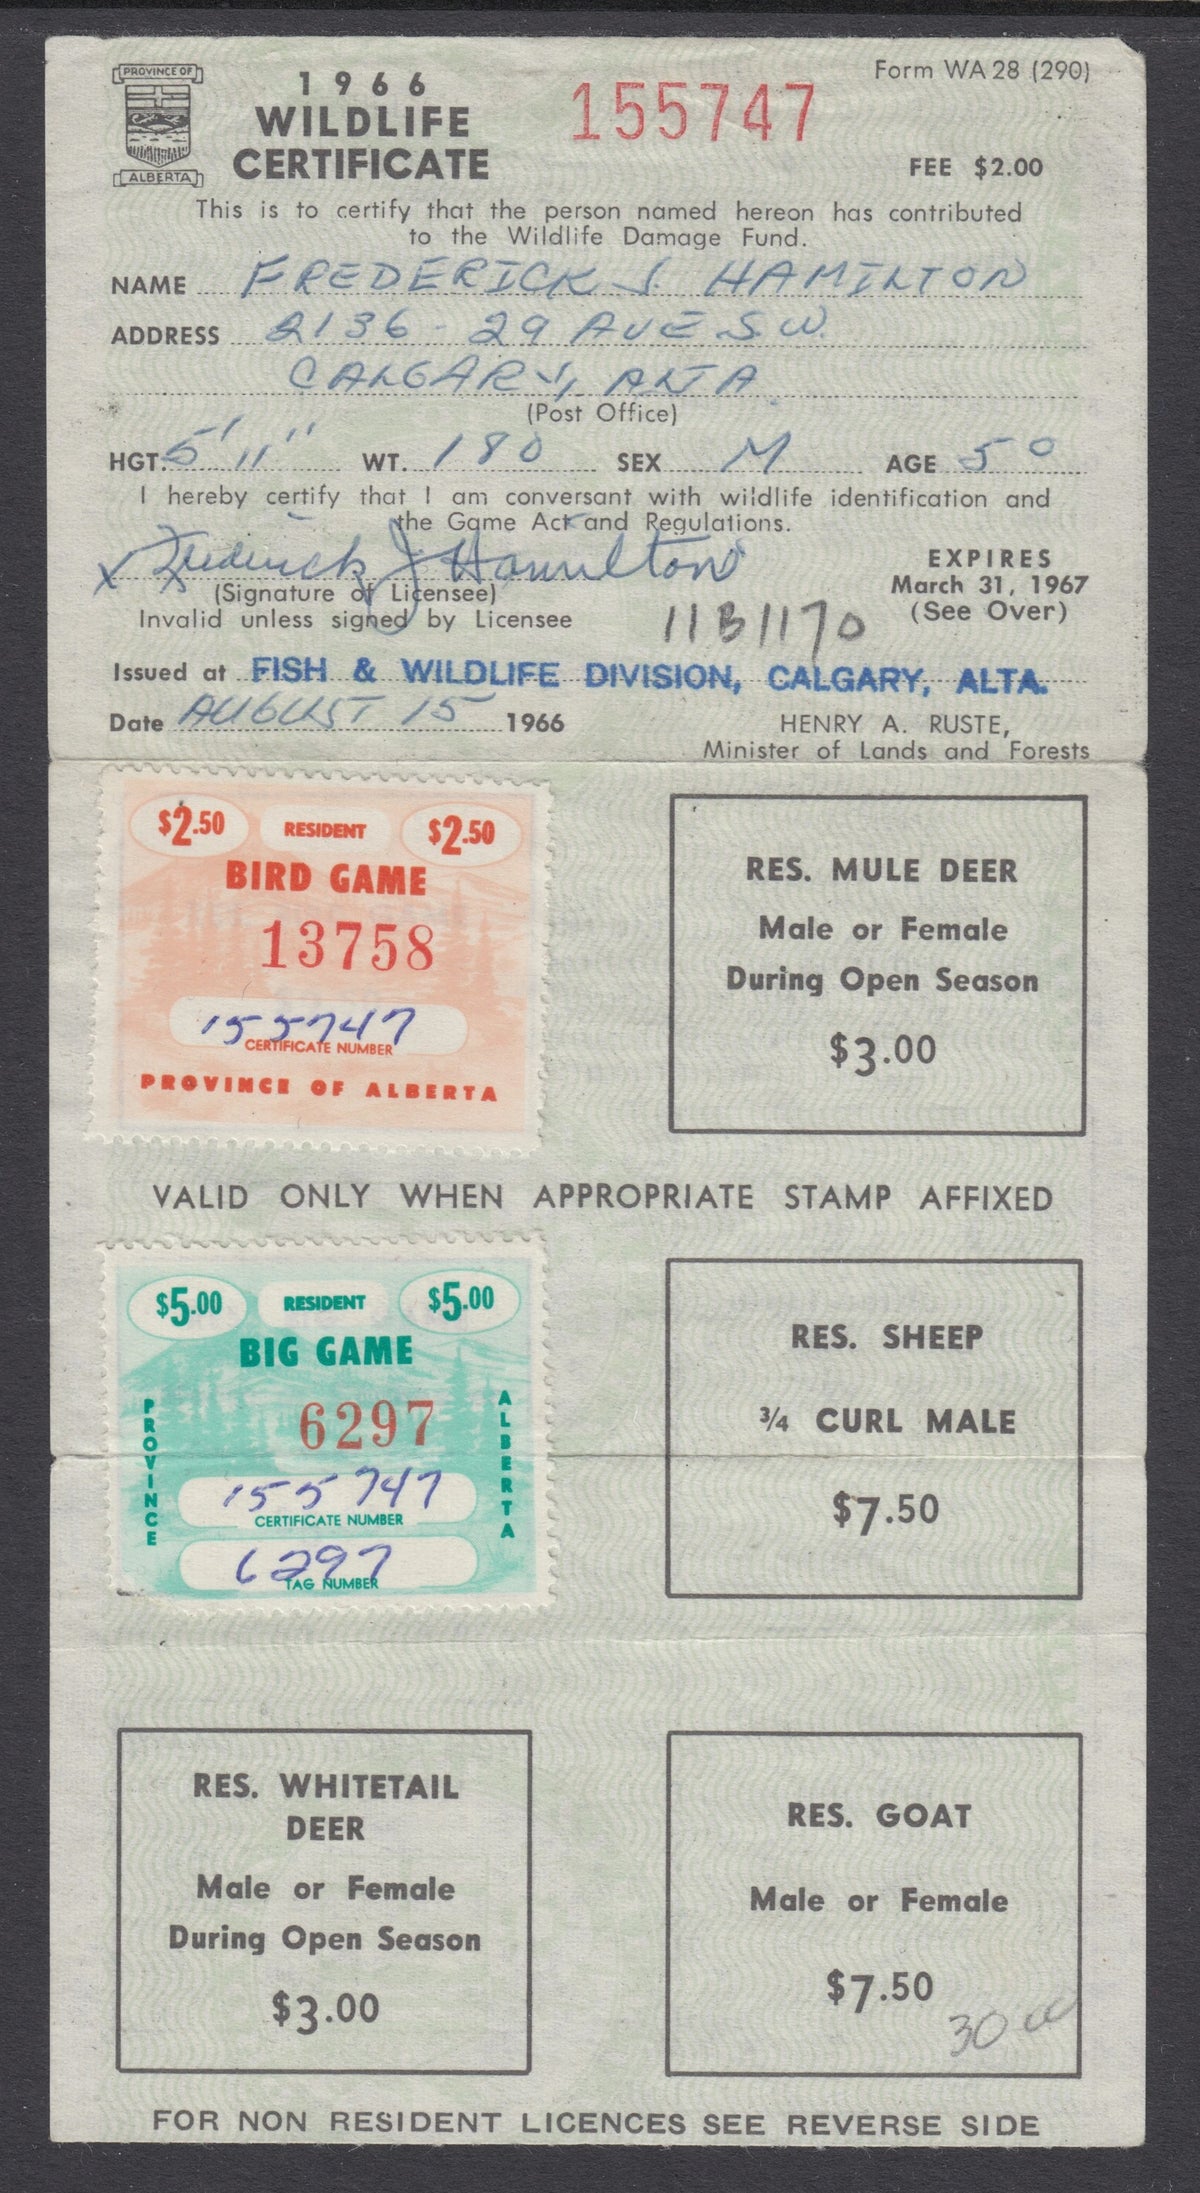 0370AW2111 - AW28, 29 - Used on License